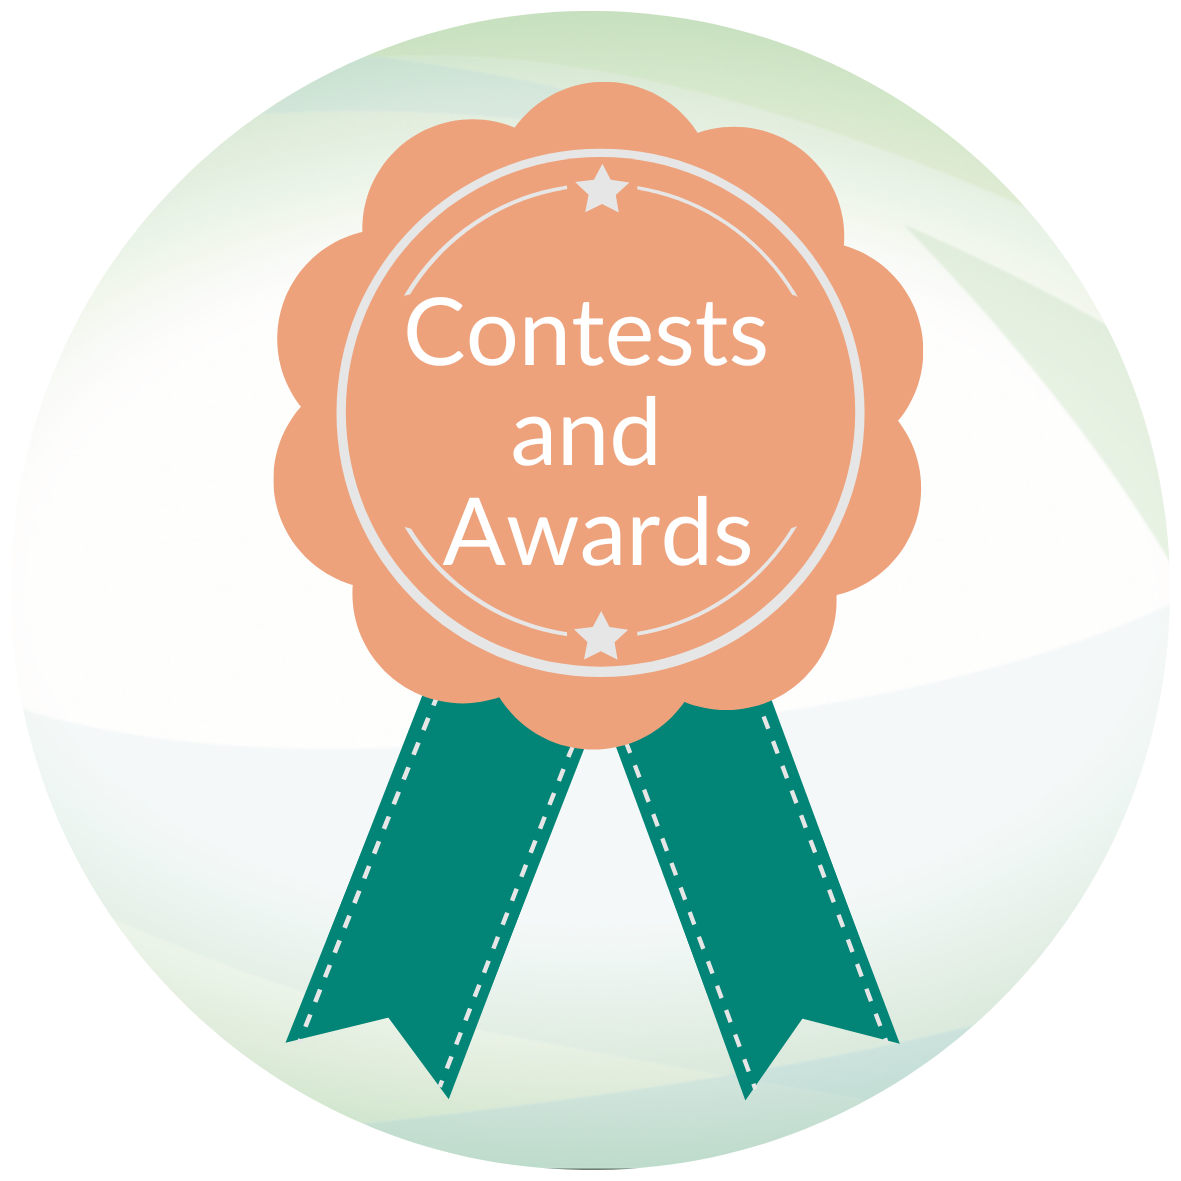 Contests and Awards